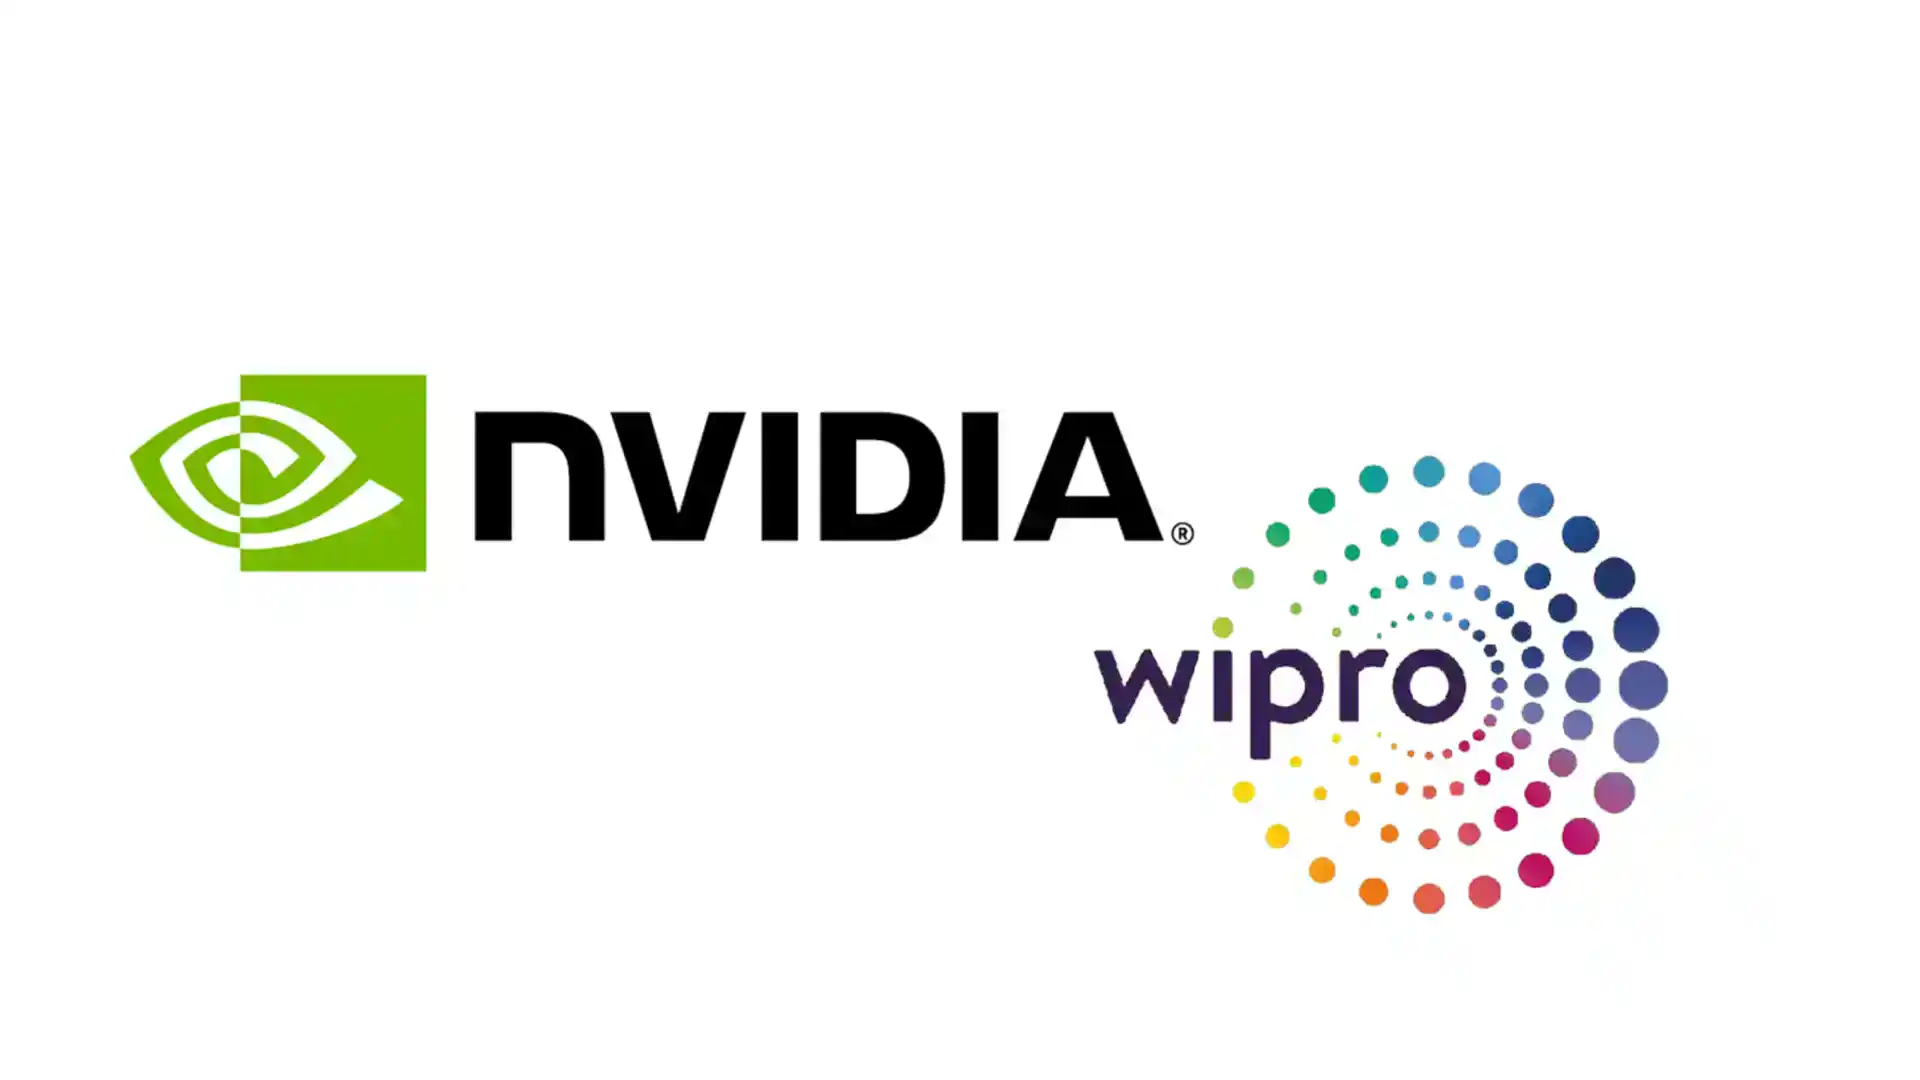 Wipro and Nvidia logos merged, representing AI-driven healthcare innovation